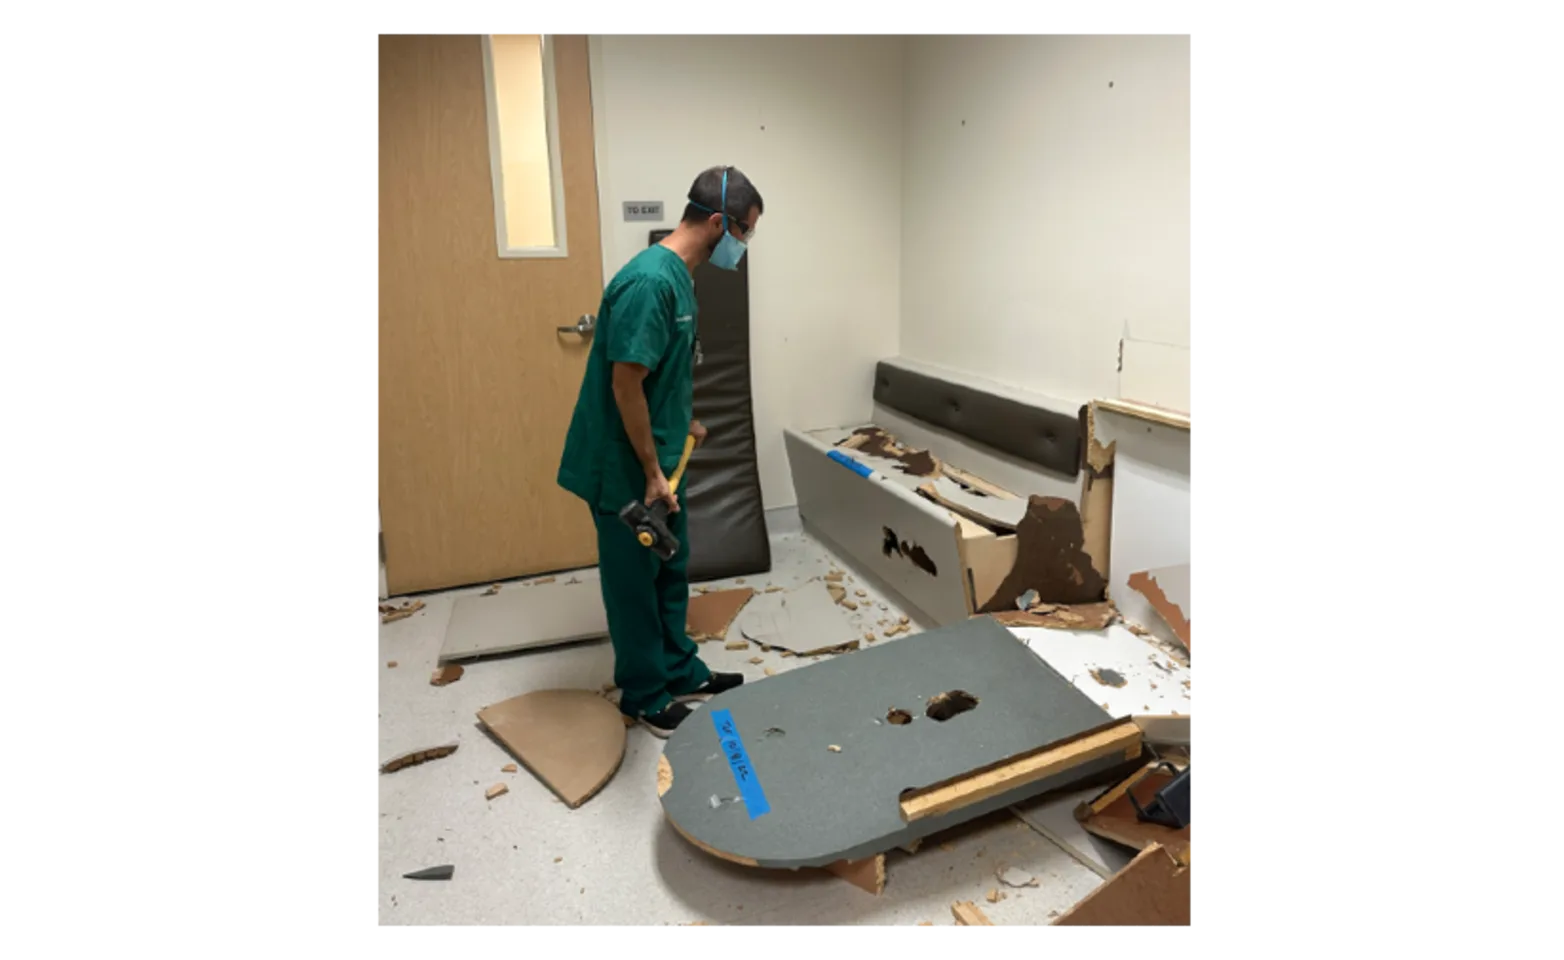 A staff member from Campbell holding a sledgehammer to a room in the hospital